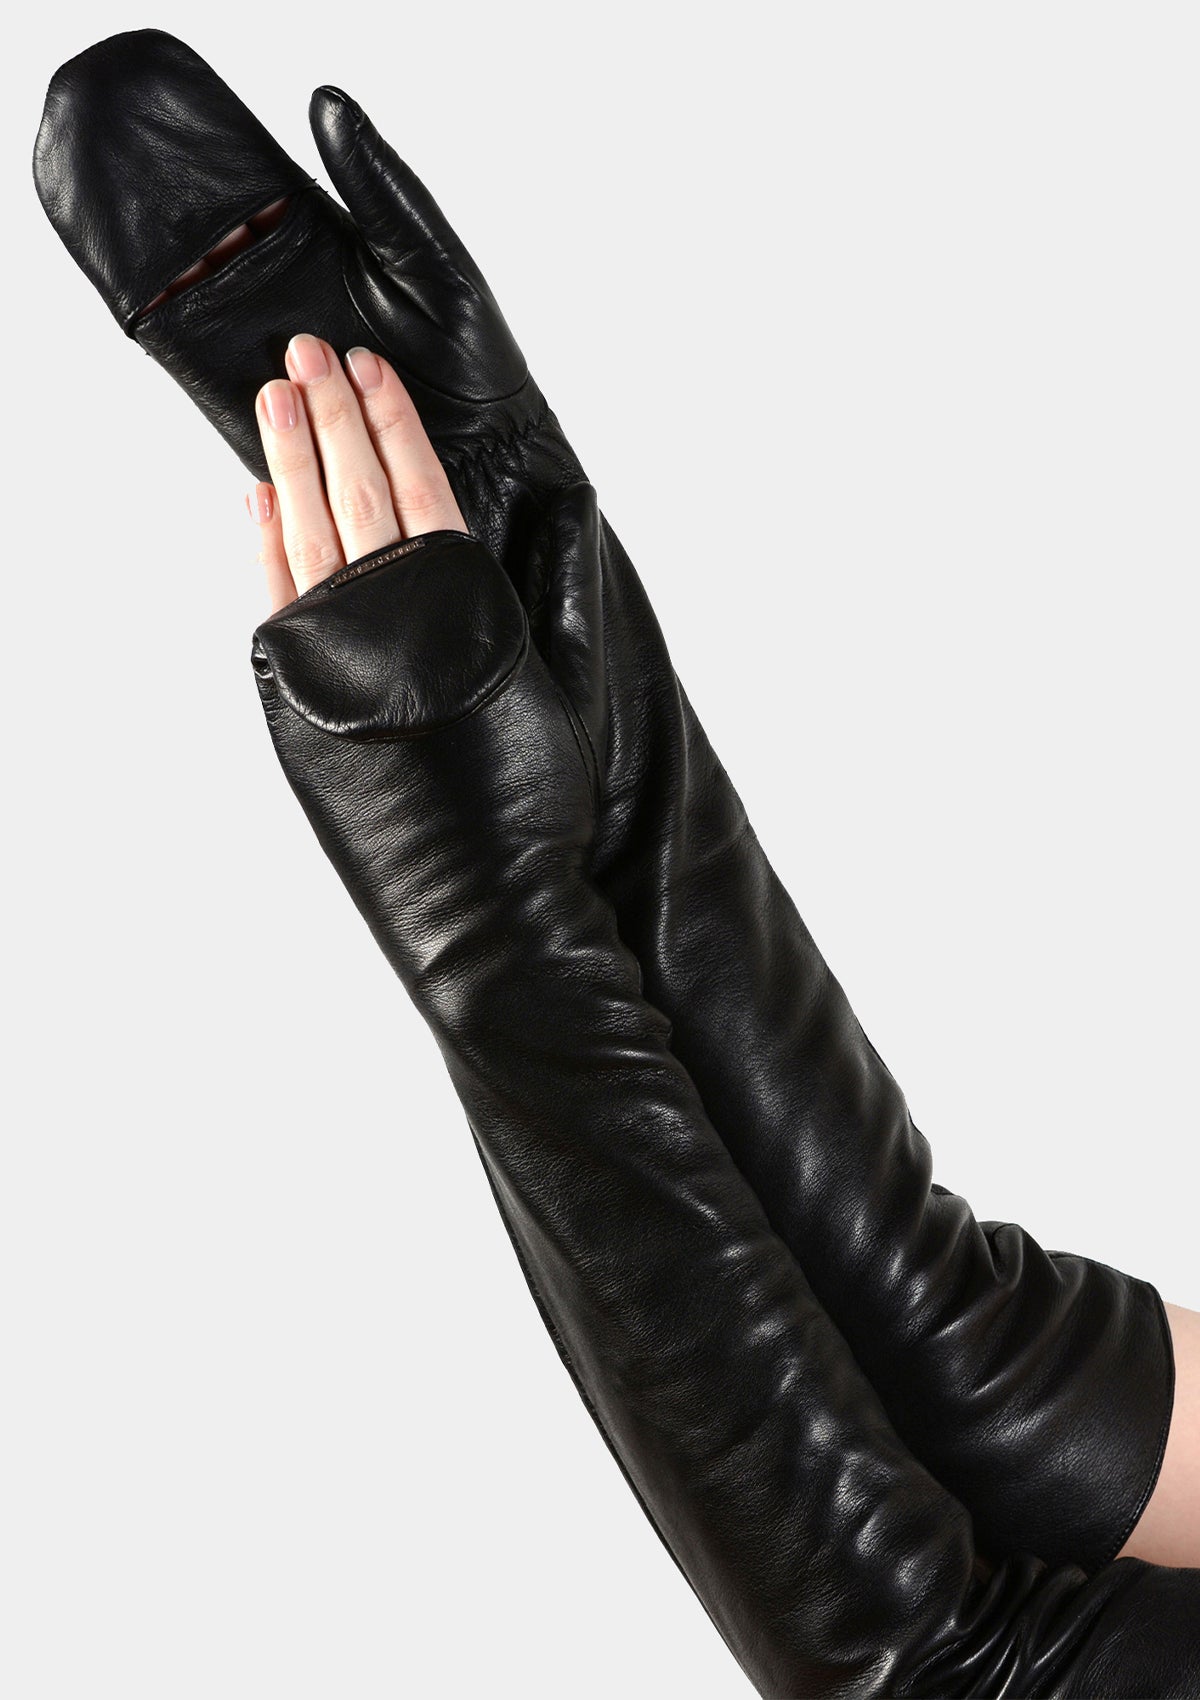 Extra long Opera length Leather Stylish Mittens Gloves